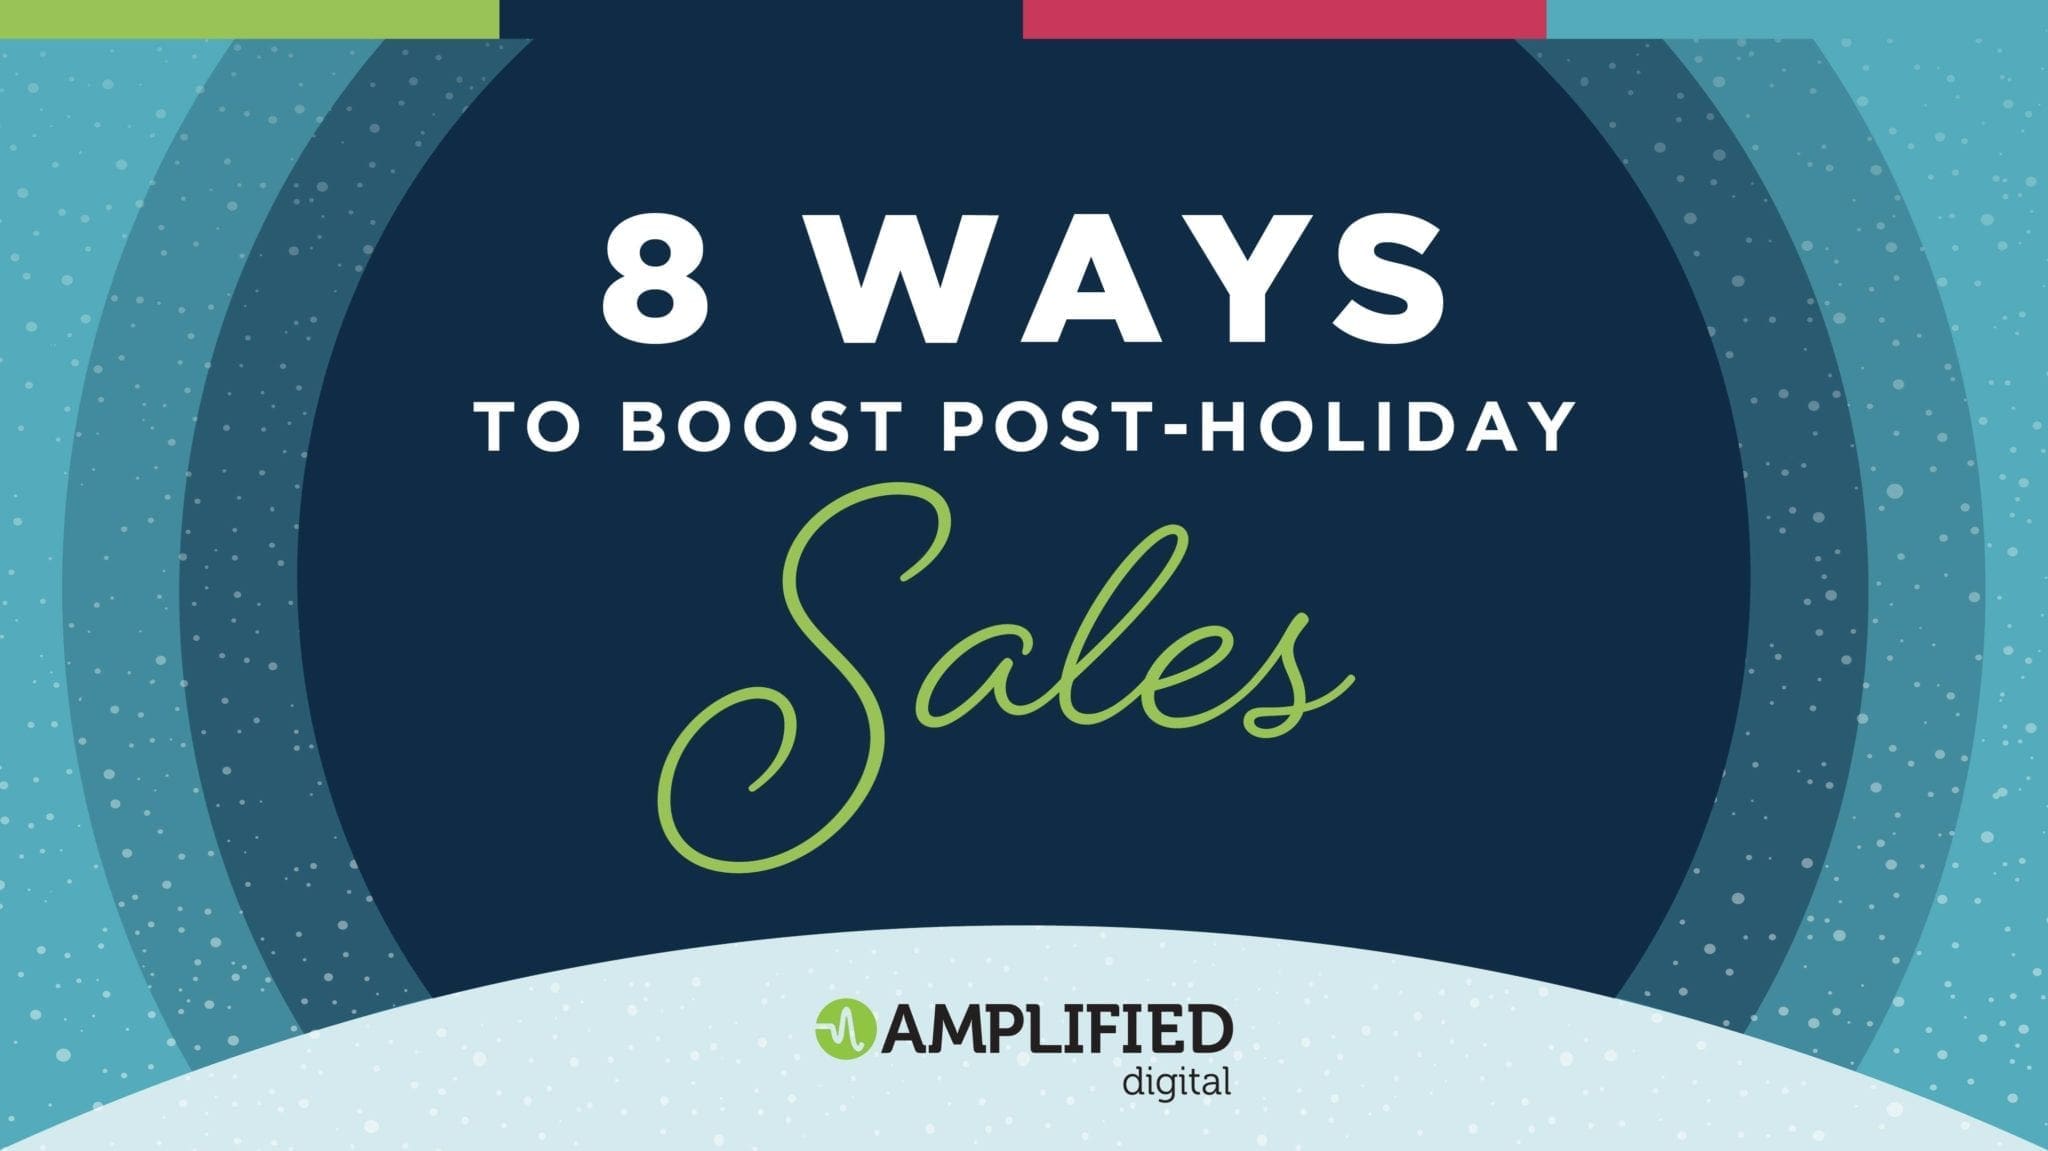 8 Ways to Boost Post-Holiday Sales